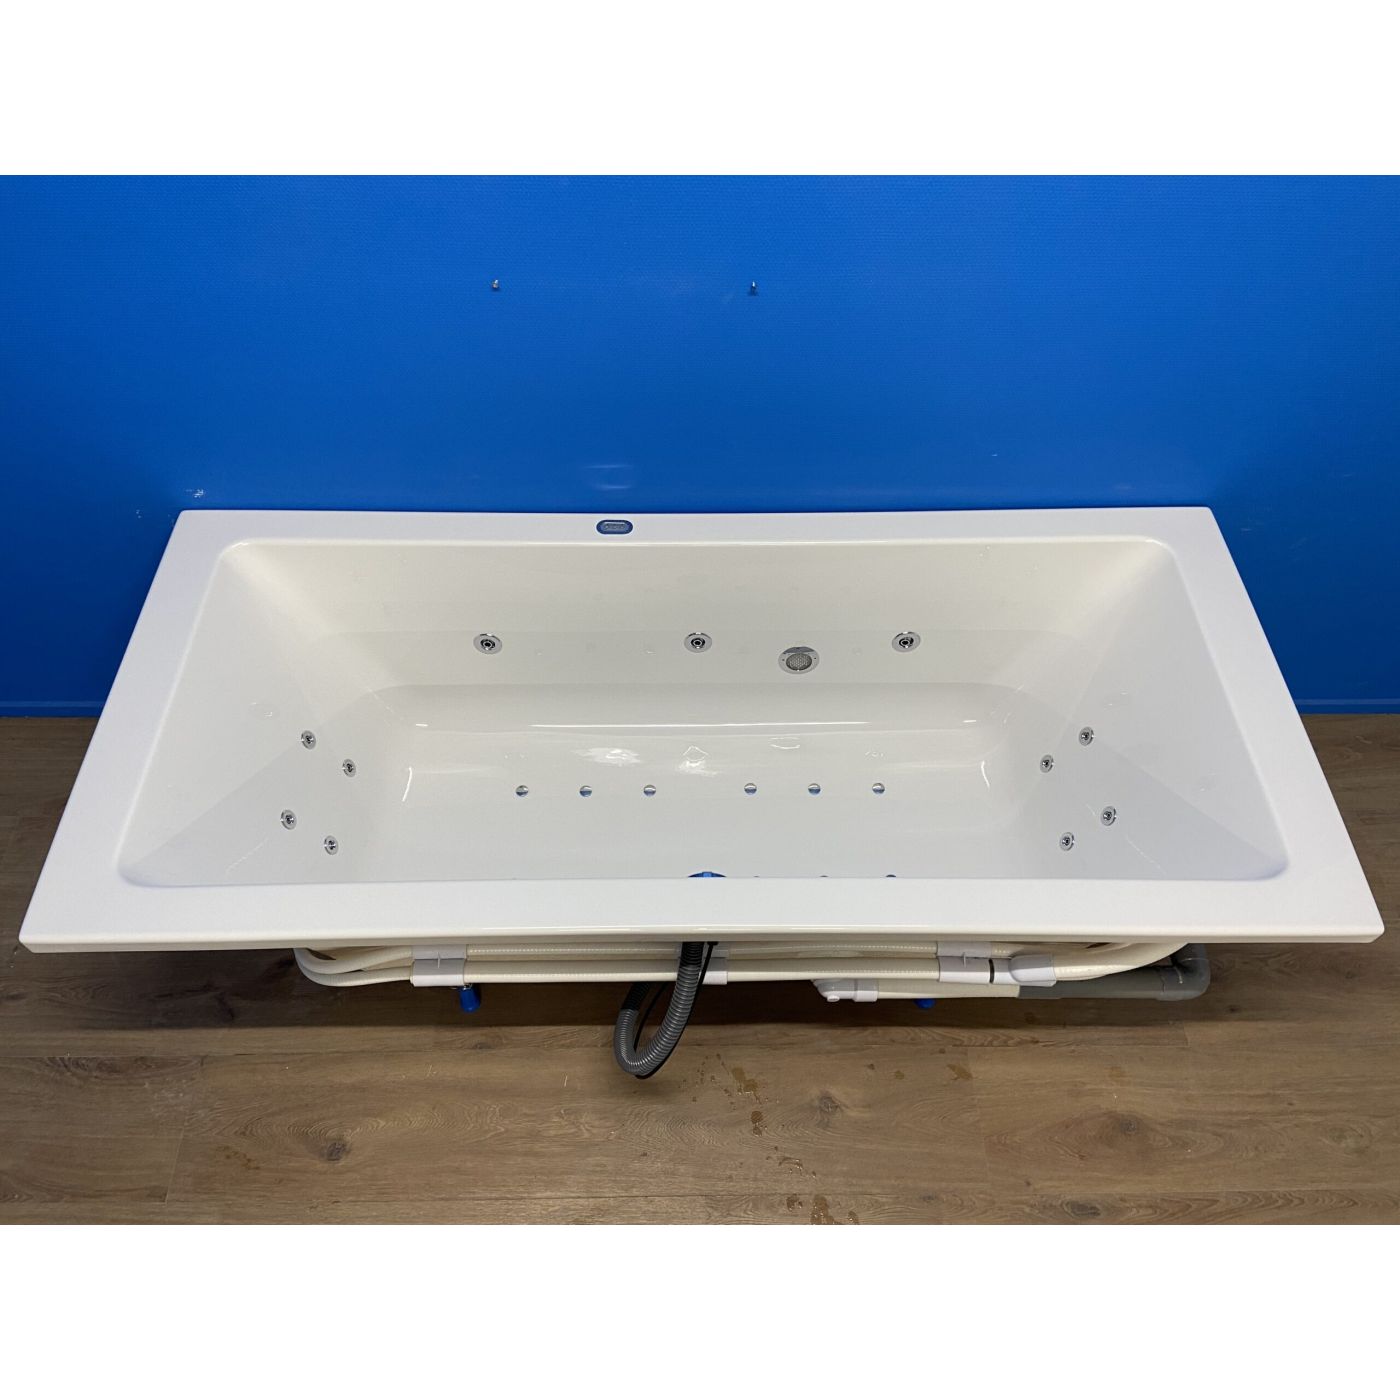 Villeroy & Boch Architectura bubbelbad met Basic systeem 180x80 wit